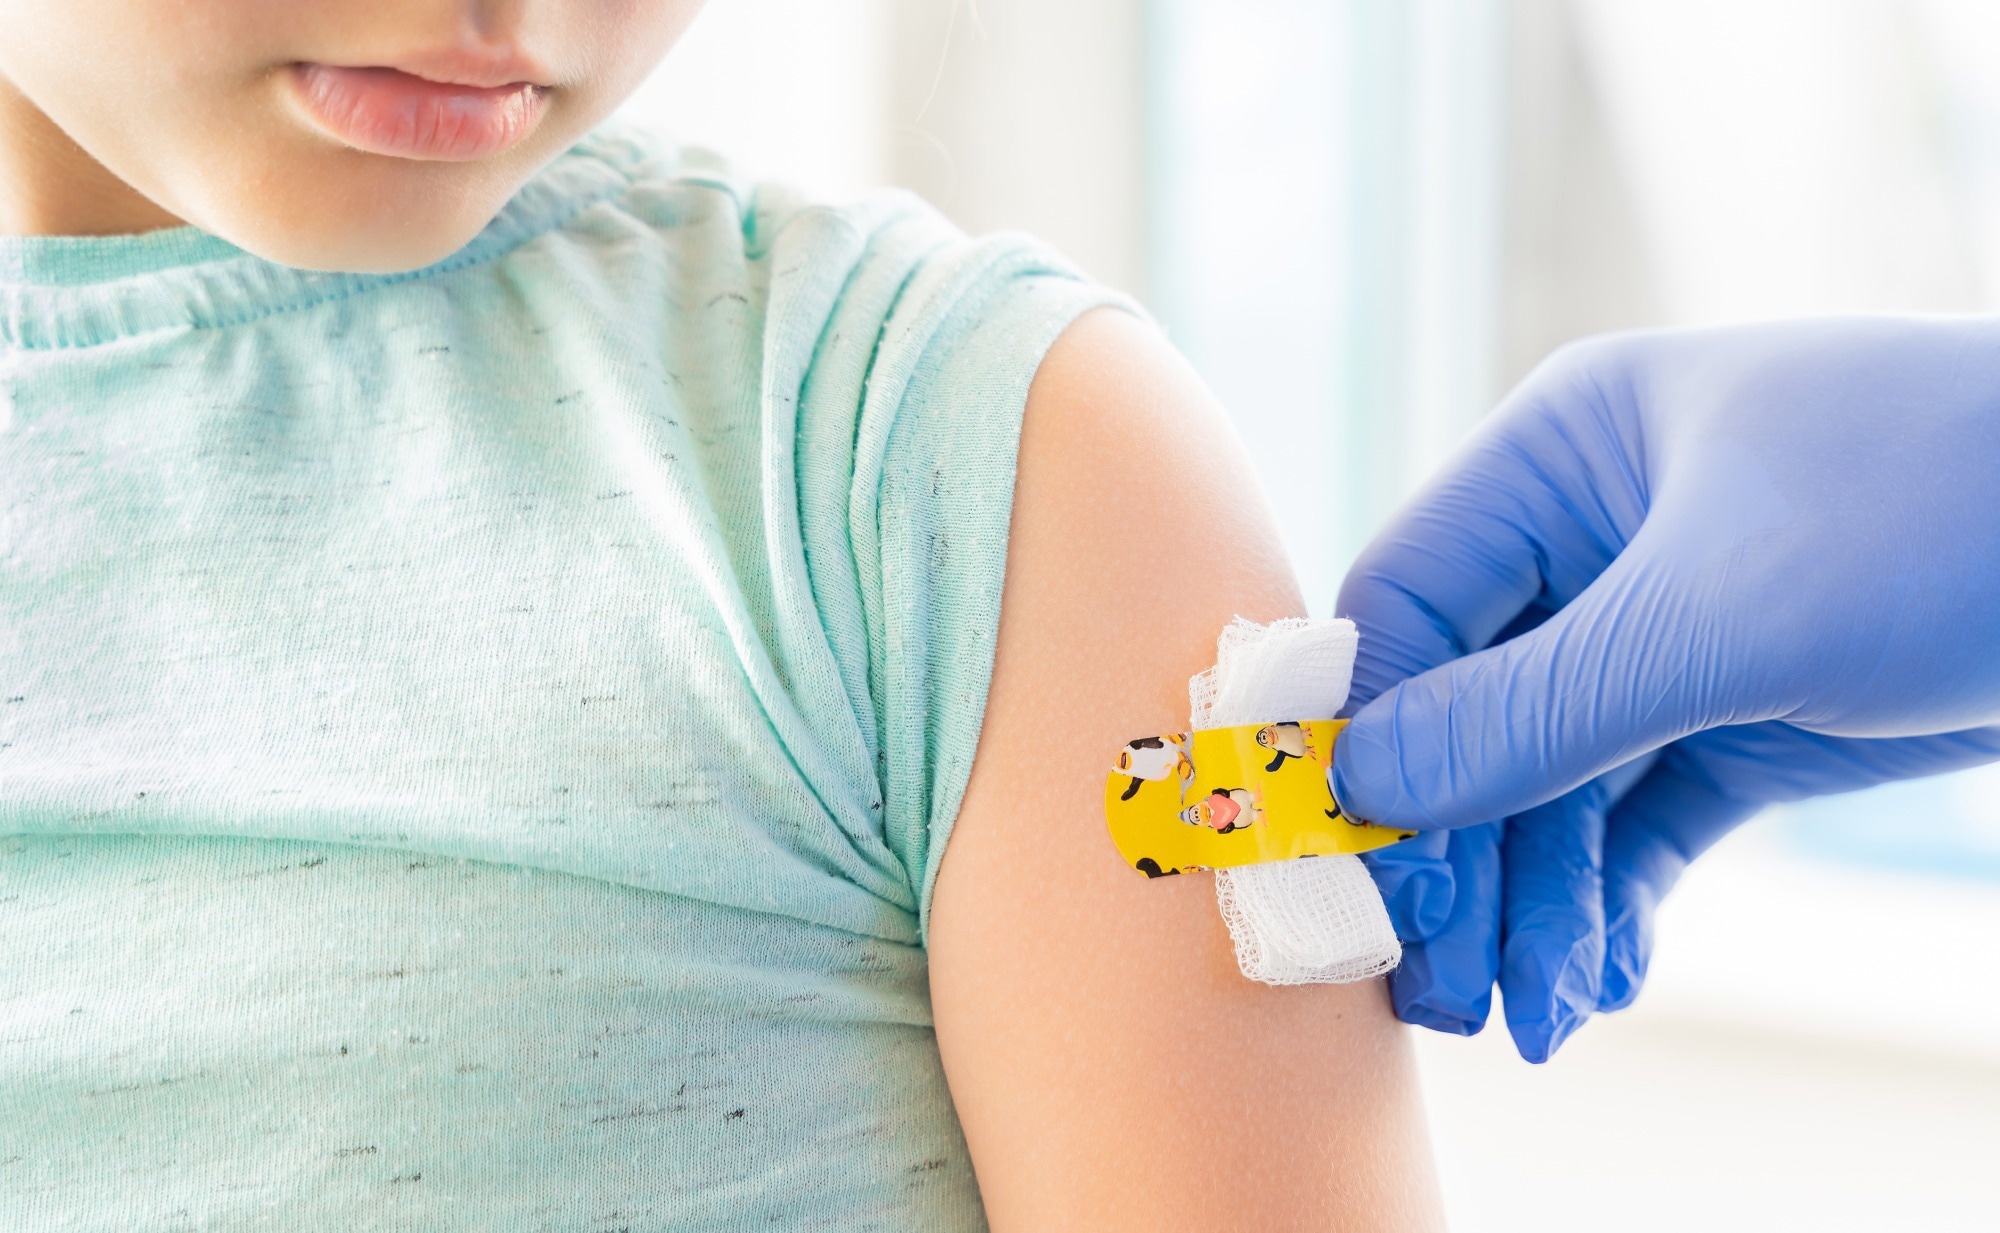 Study: Optimal timing of influenza vaccination in young children: population based cohort study. Image Credit: Ira Lichi / Shutterstock